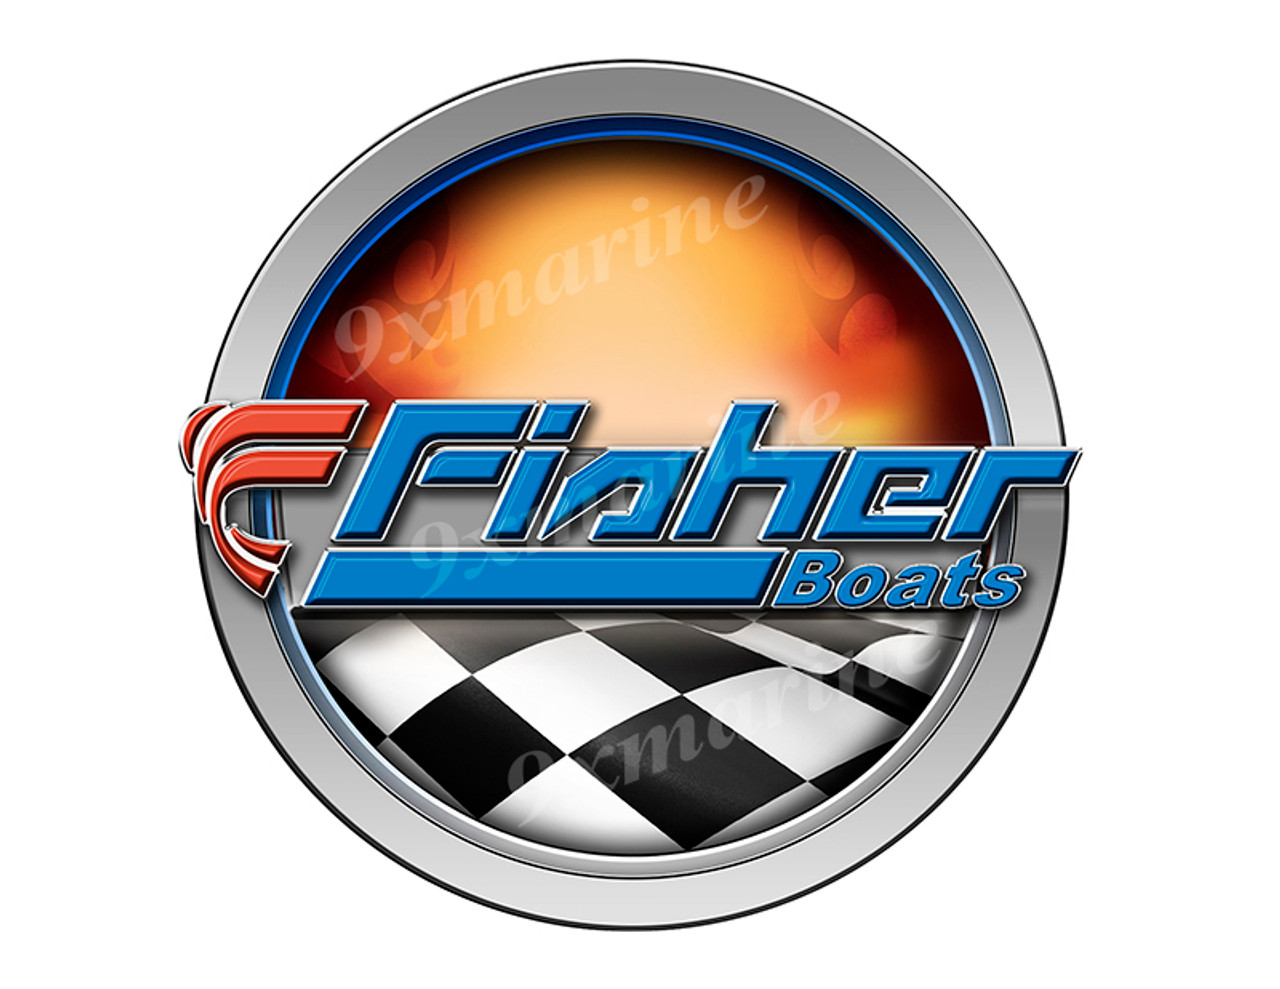 Fisher Racing Boat Round Sticker - Name Plate